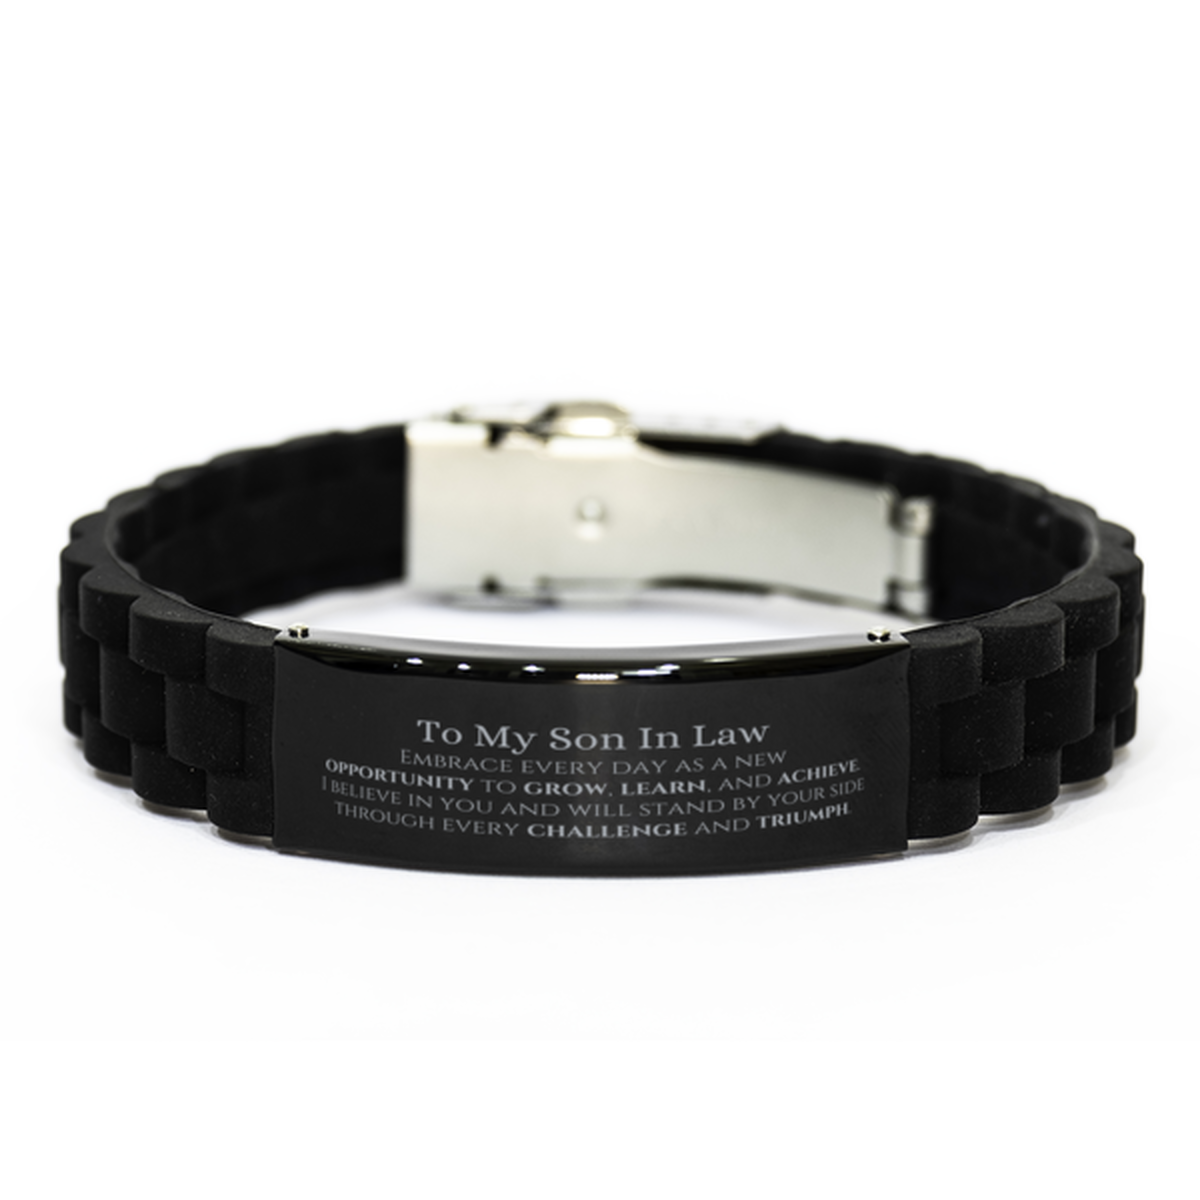 To My Son In Law Gifts, I believe in you and will stand by your side, Inspirational Black Glidelock Clasp Bracelet For Son In Law, Birthday Christmas Motivational Son In Law Gifts